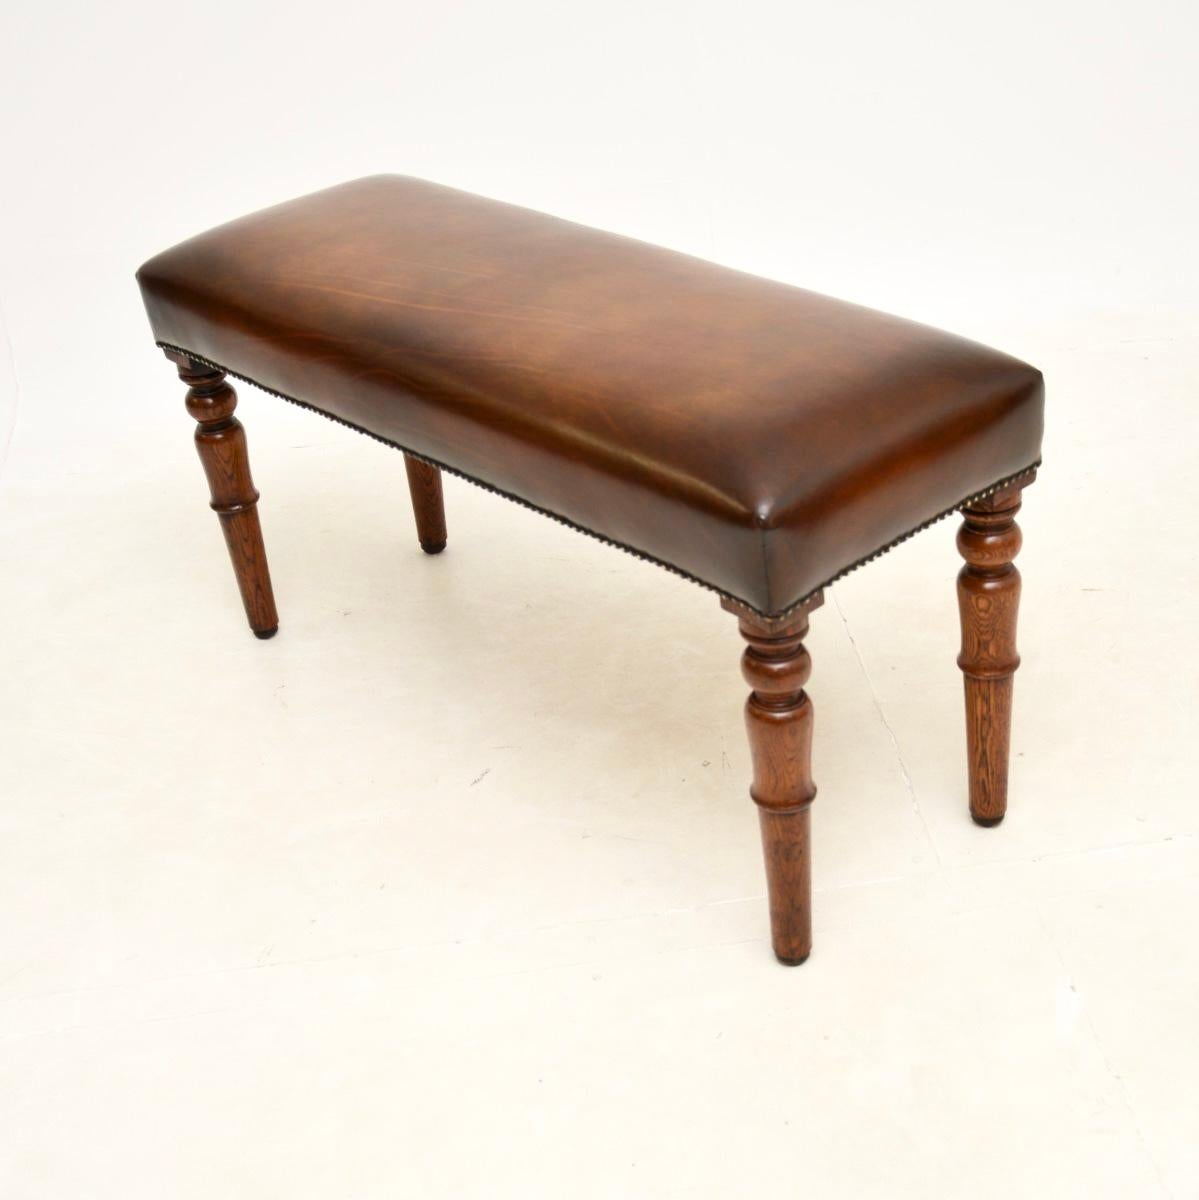 High Victorian Antique Victorian Leather and Oak Stool / Bench For Sale